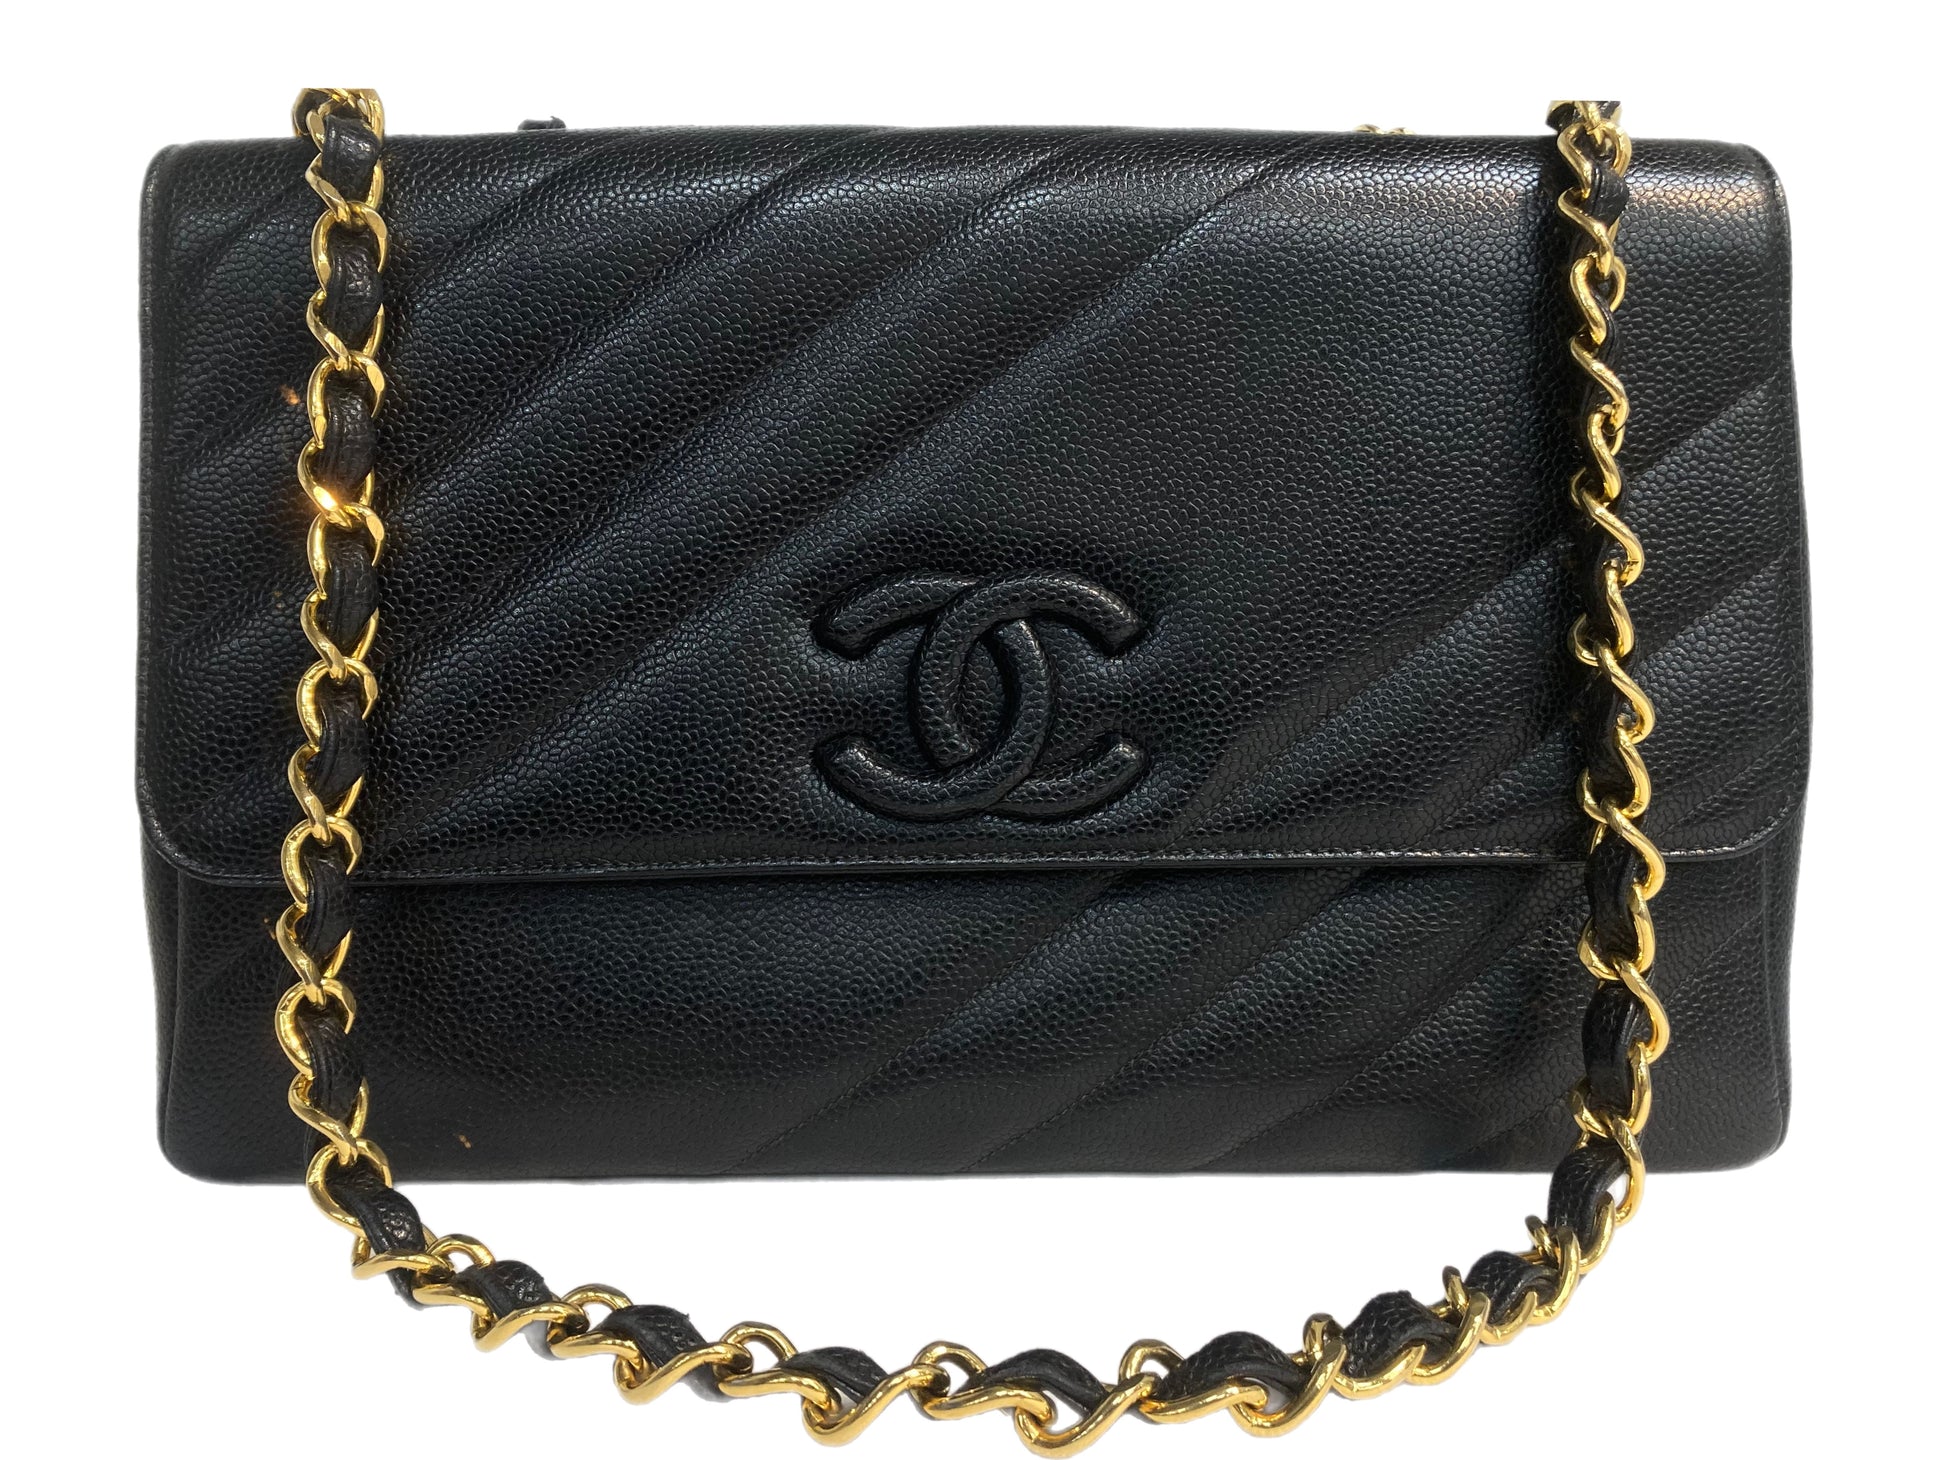 A Closer Look: Chanel Diagonal Quilted Flap Bag